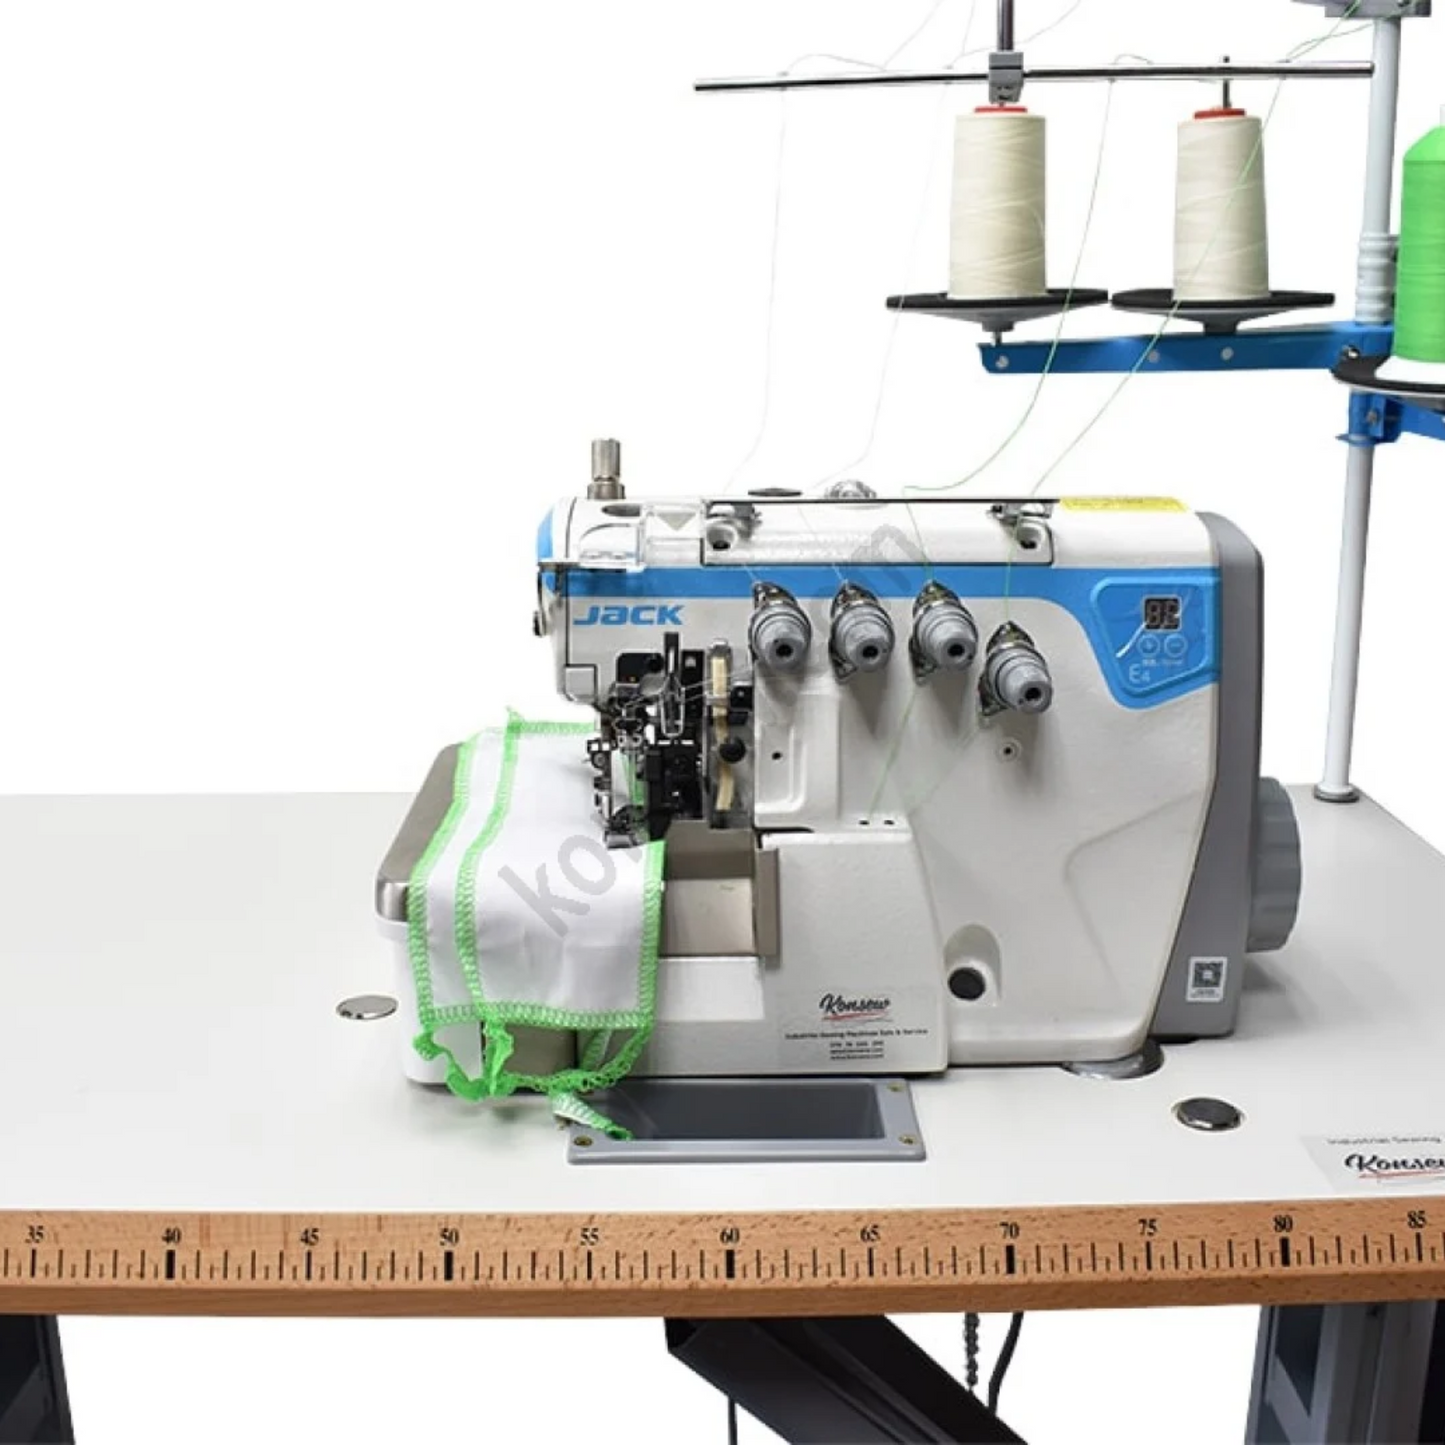 Jack E4 4 thread overlock sewing machine (direct drive) - Multi color - Front view